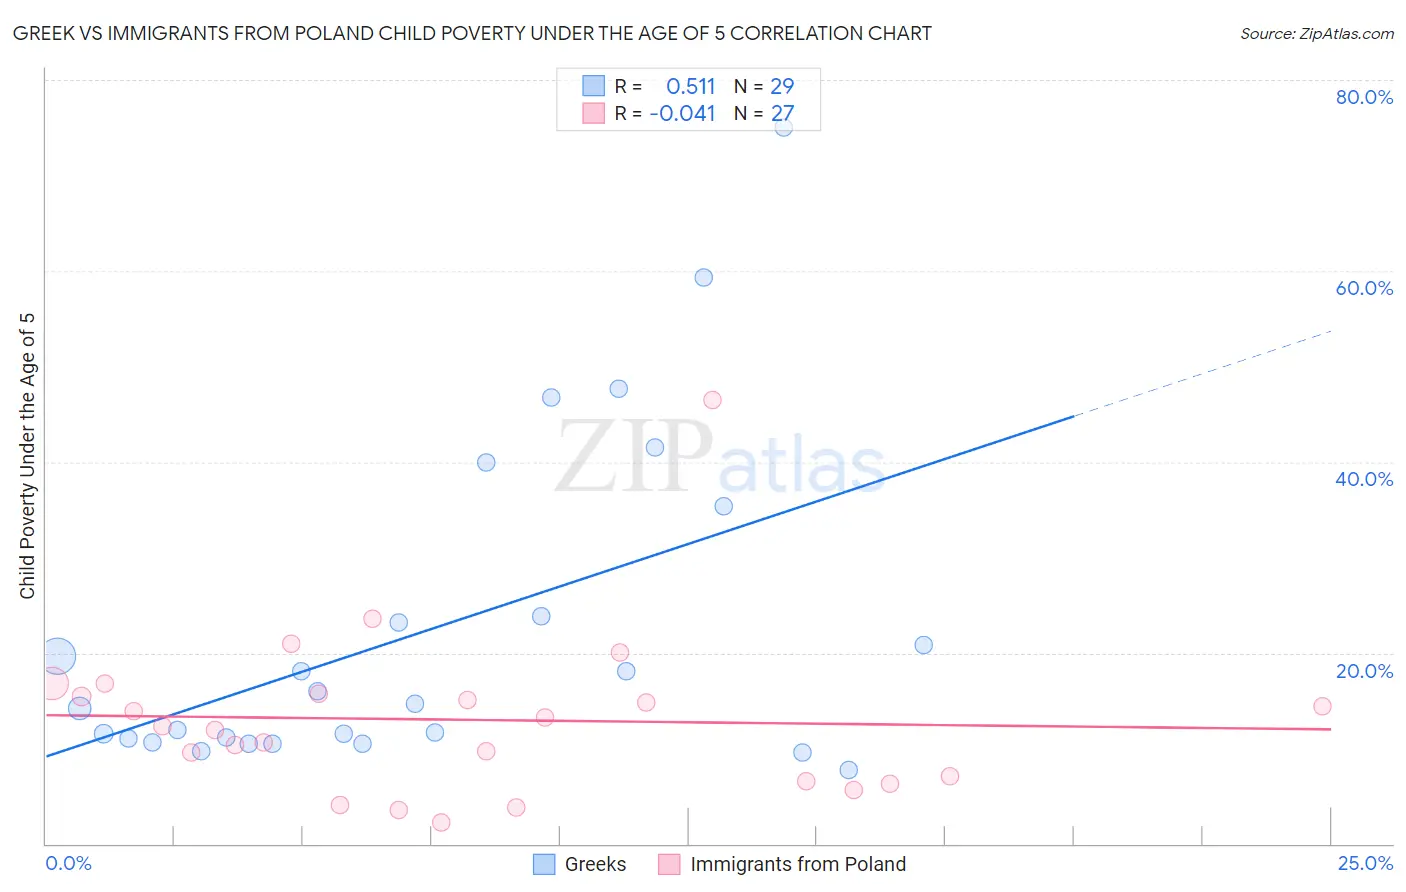 Greek vs Immigrants from Poland Child Poverty Under the Age of 5